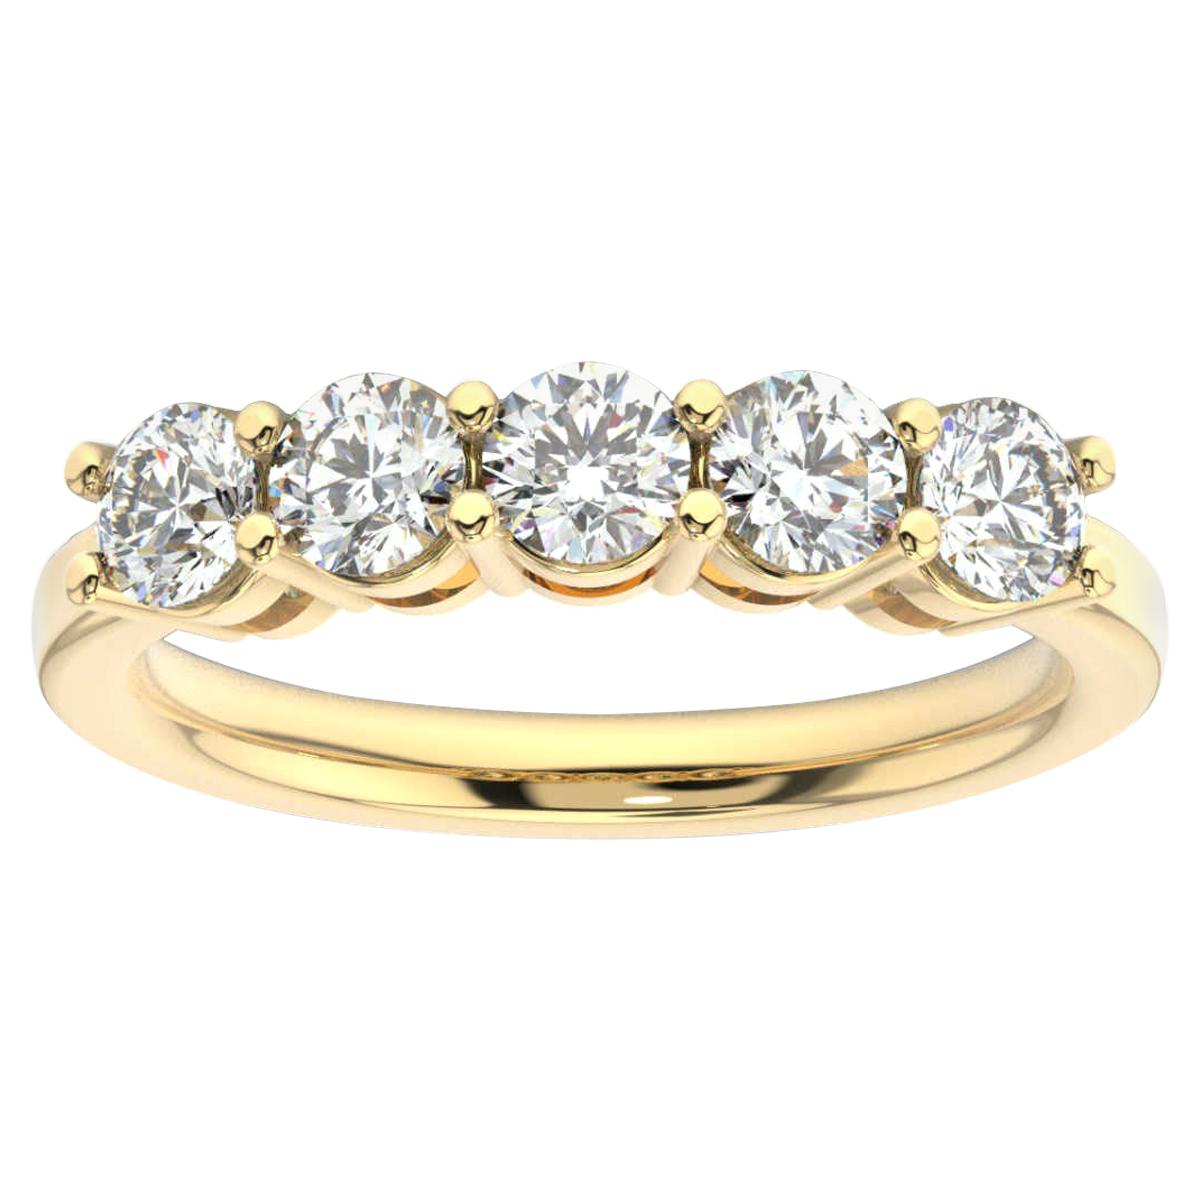 14K Yellow Gold Marne 5 Stone Diamond Ring '1 Ct. Tw' For Sale